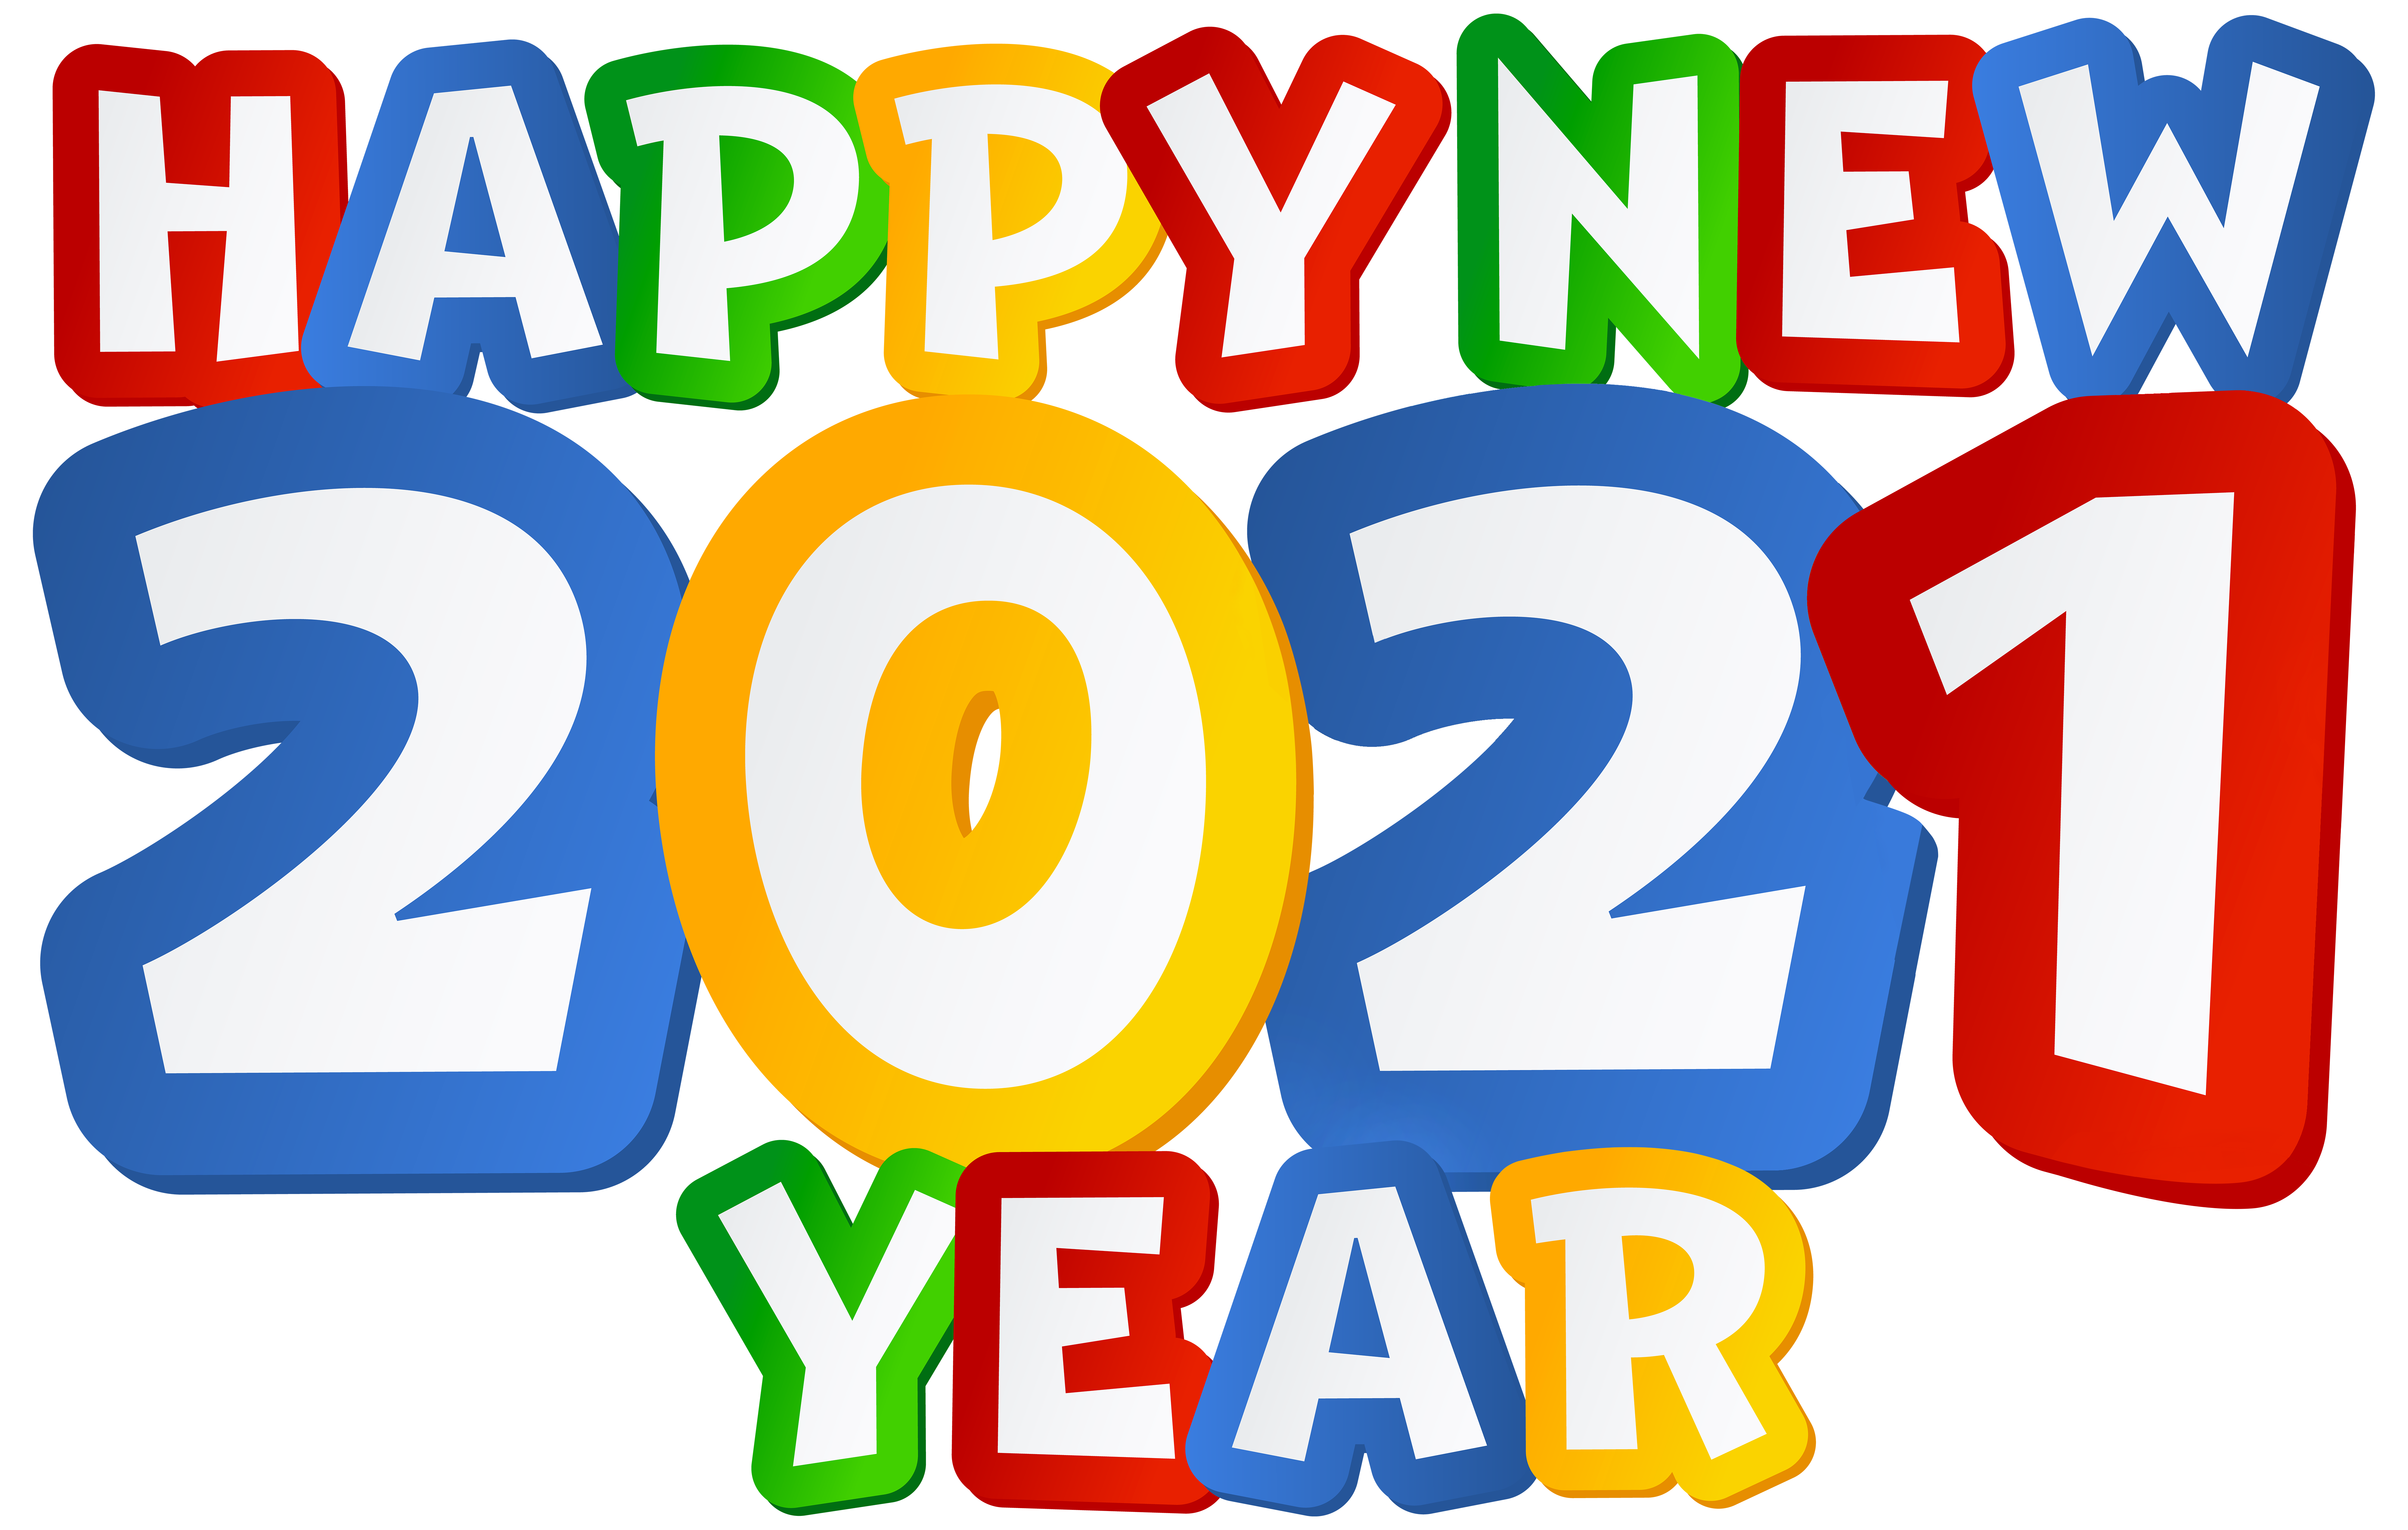 Happy New Year PNG Clip Art Image Quality Image And Transparent PNG Free Clipart